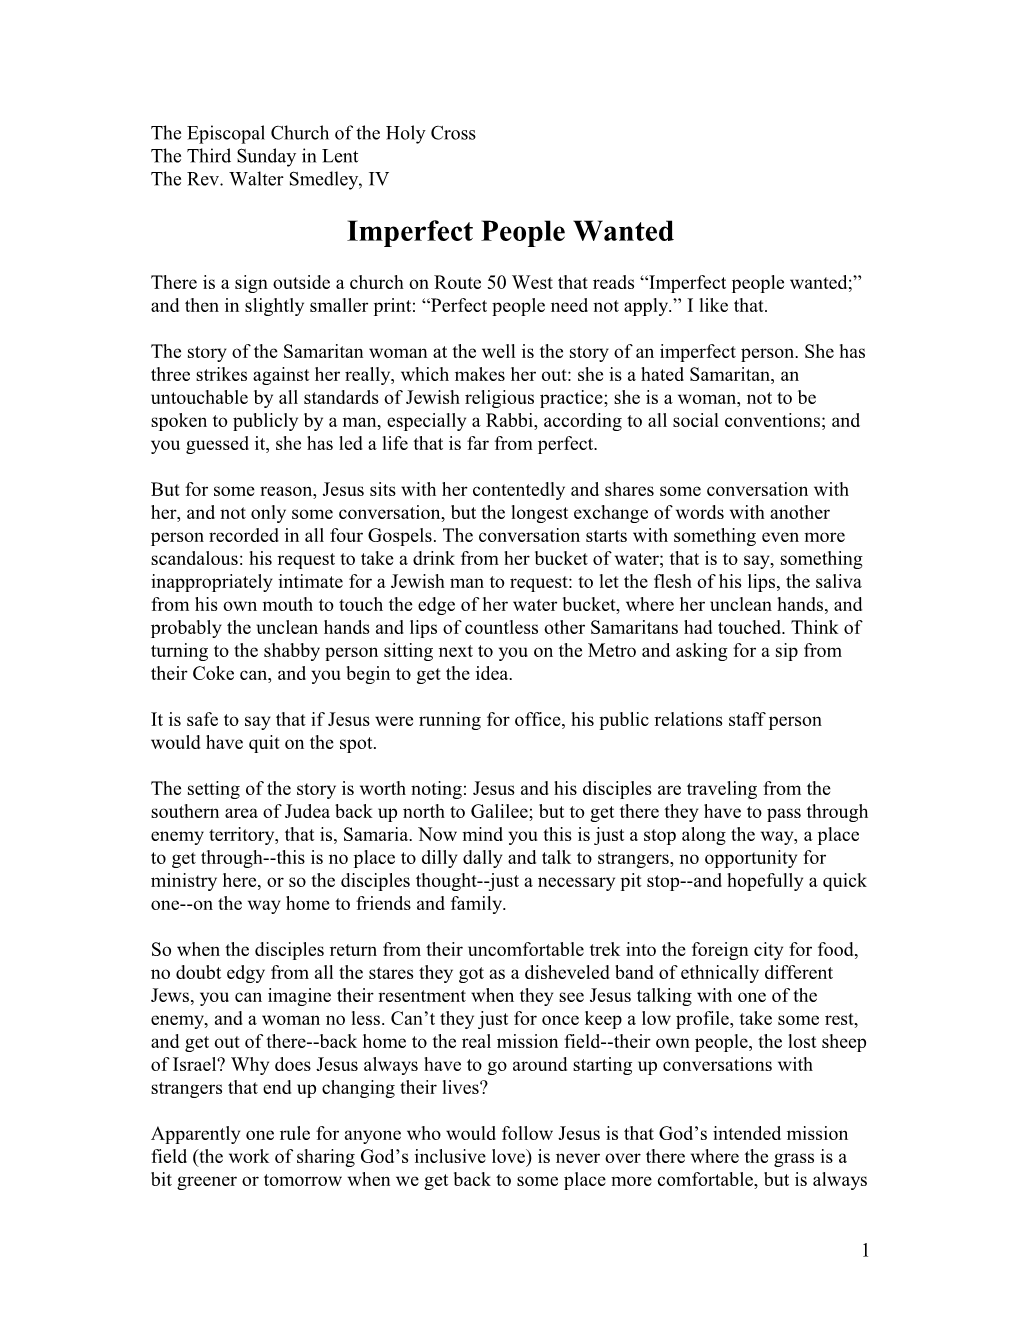 There Is a Sign Outside a Church on Route 50 West That Reads Imperfect People Wanted; And